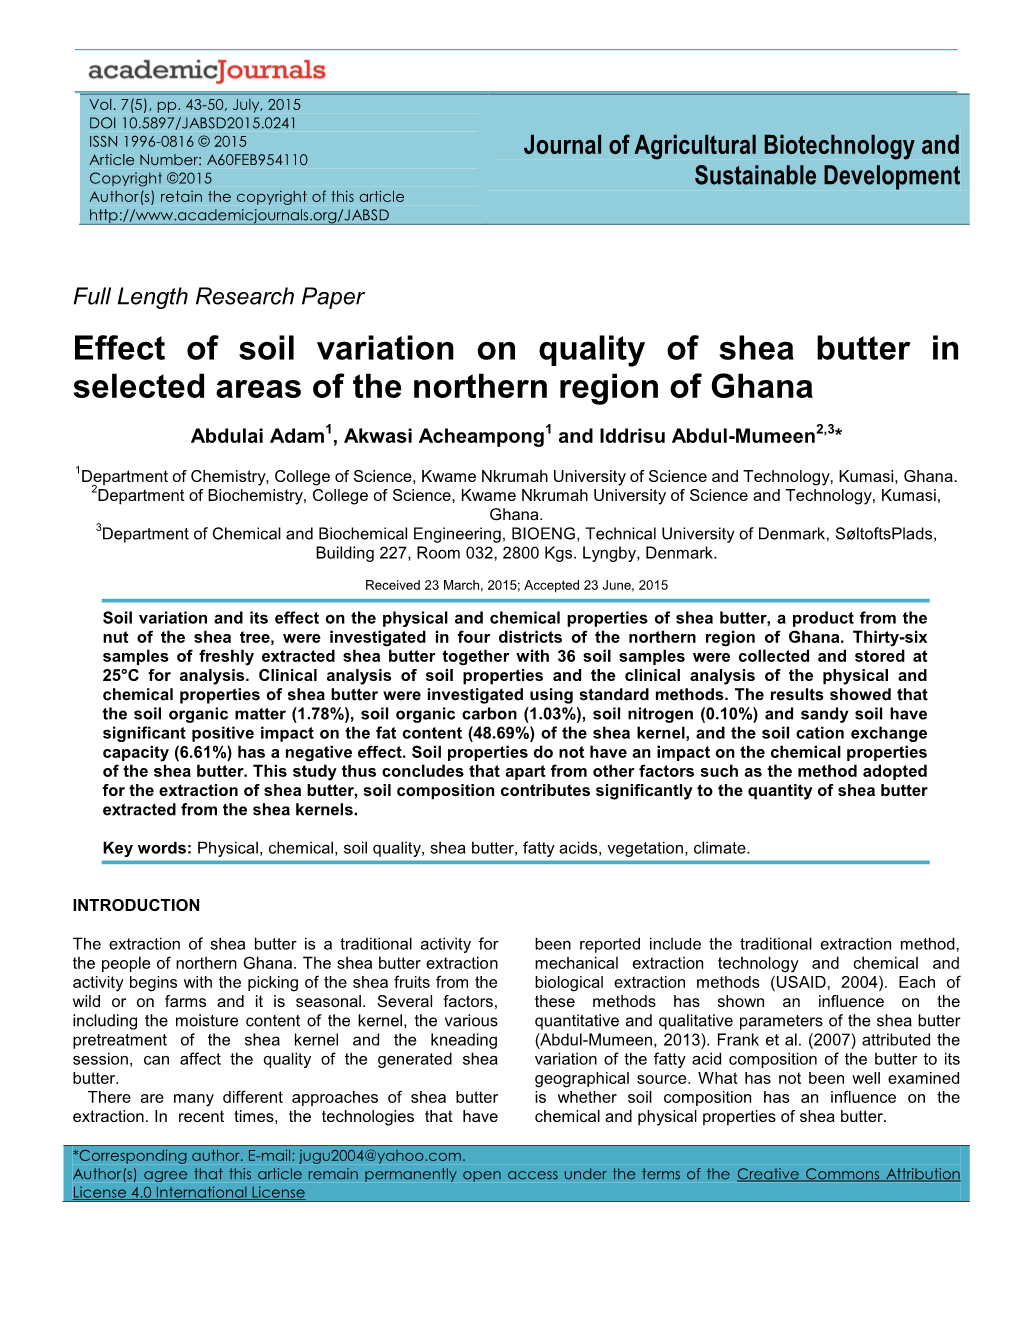 Effect of Soil Variation on Quality of Shea Butter in Selected Areas of the Northern Region of Ghana